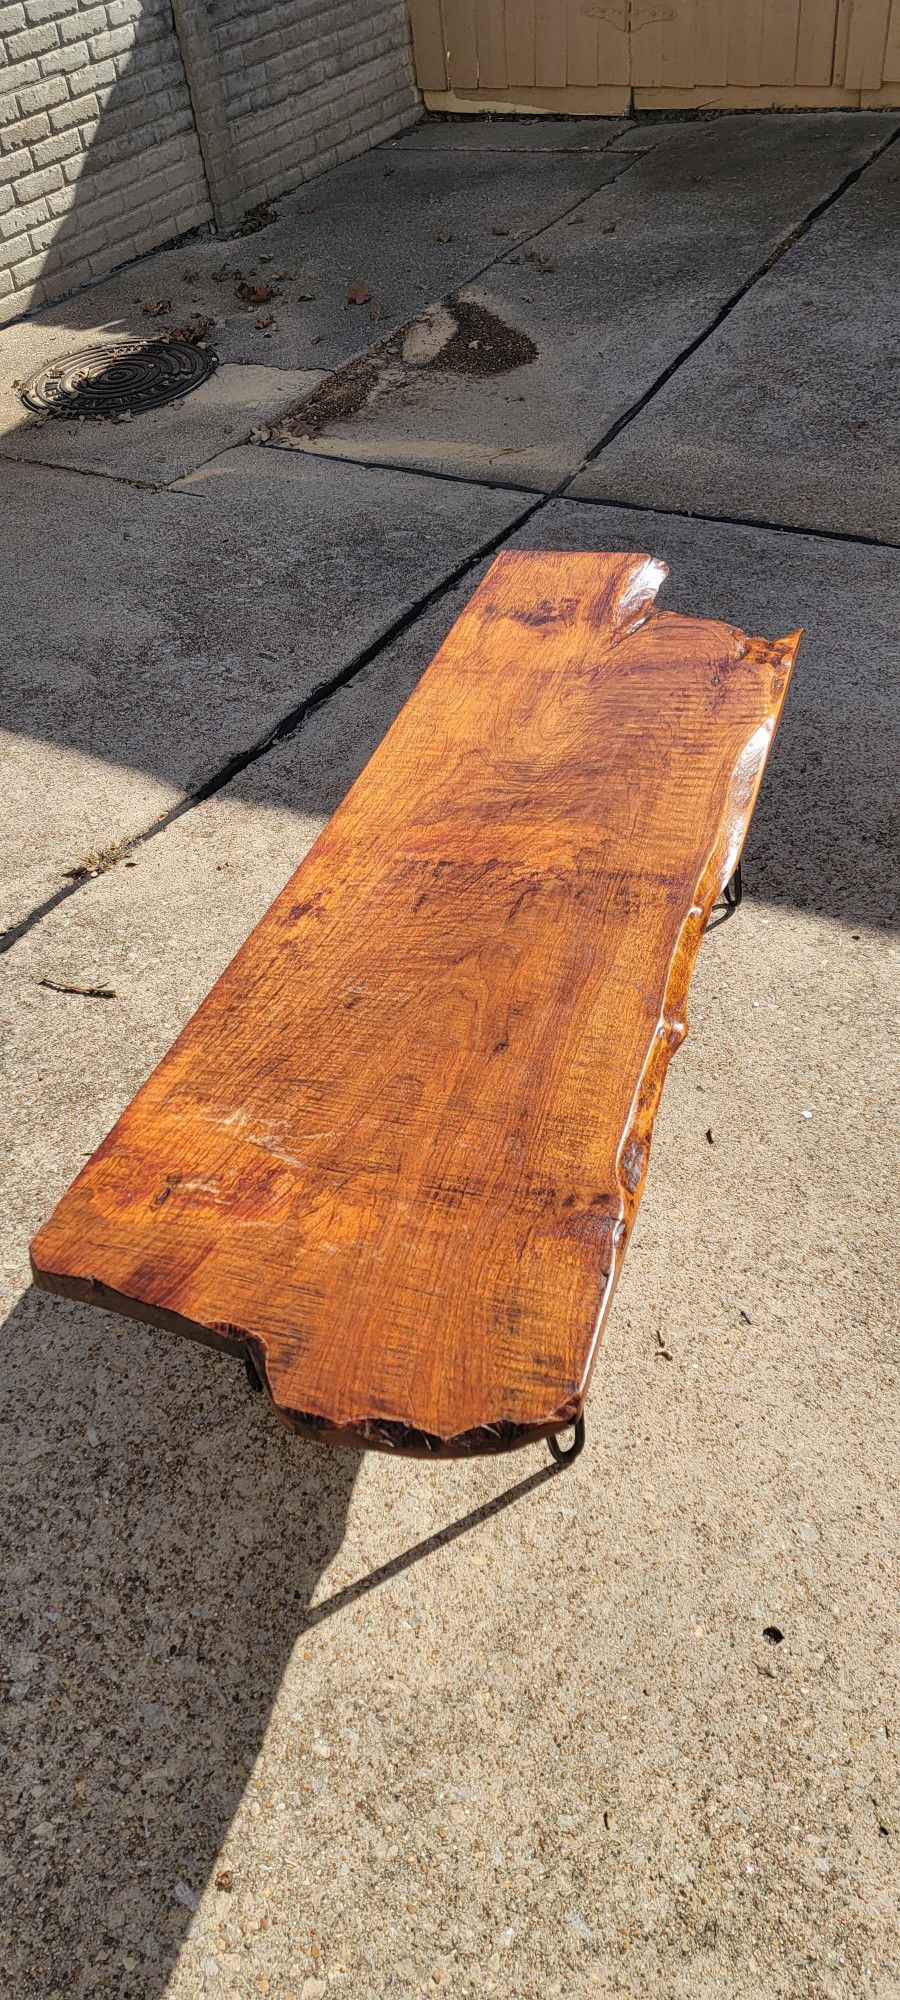 Slap Wood Table, Pin Hair Table, Accent Table, Coffee Table, Vintage Table